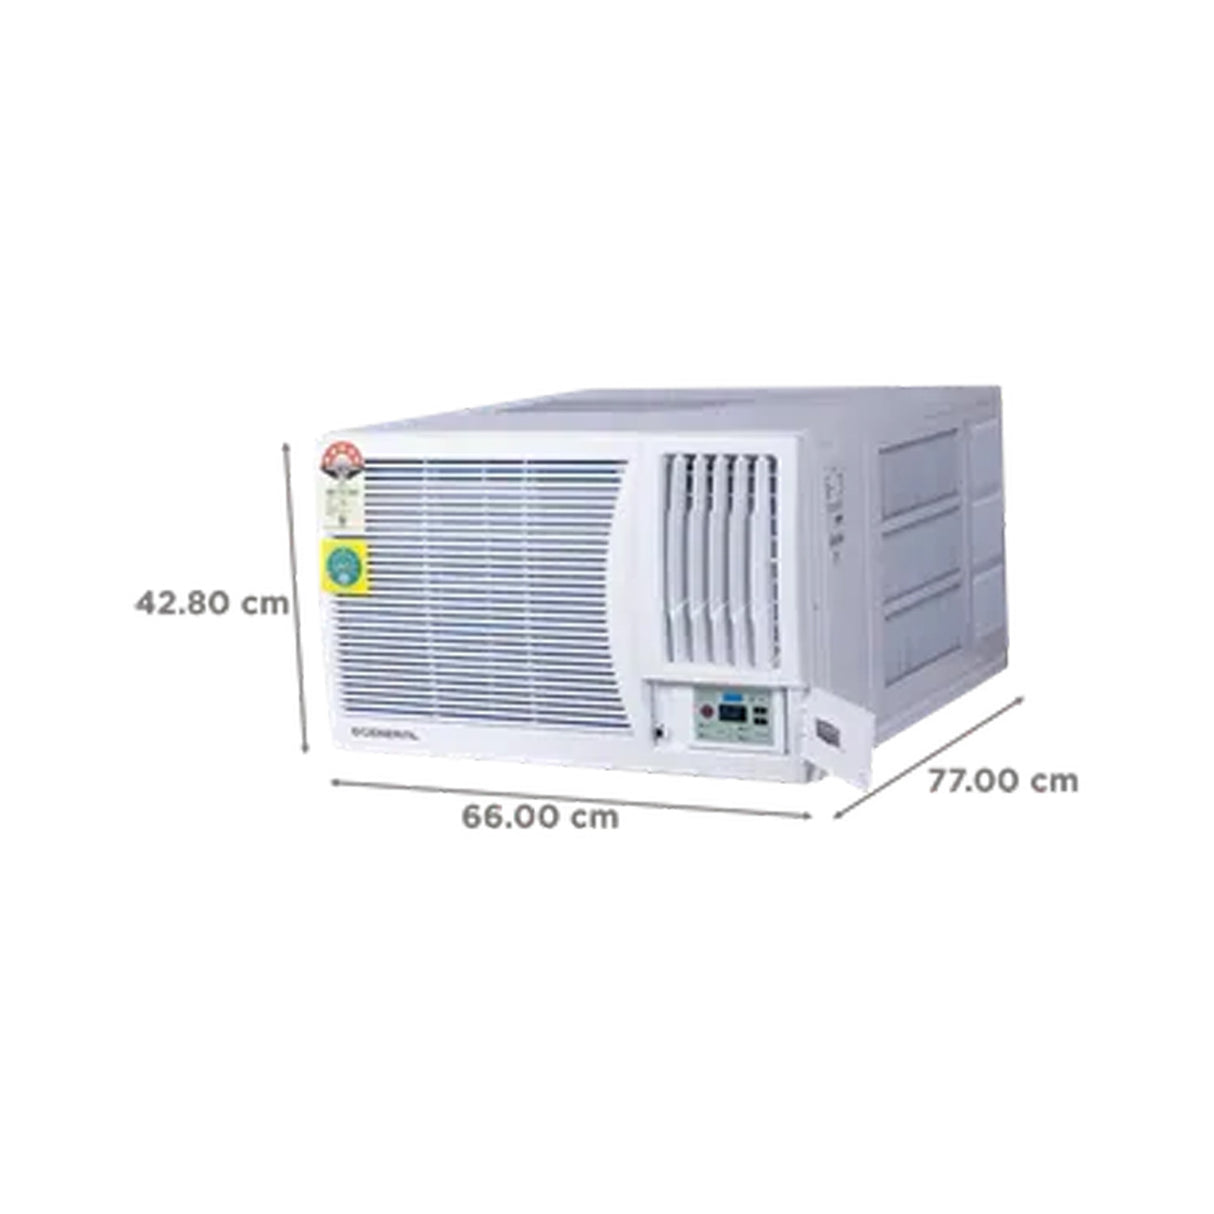 Durable and efficient: O General 1.5 Ton Window AC with advanced Copper Condenser technology.